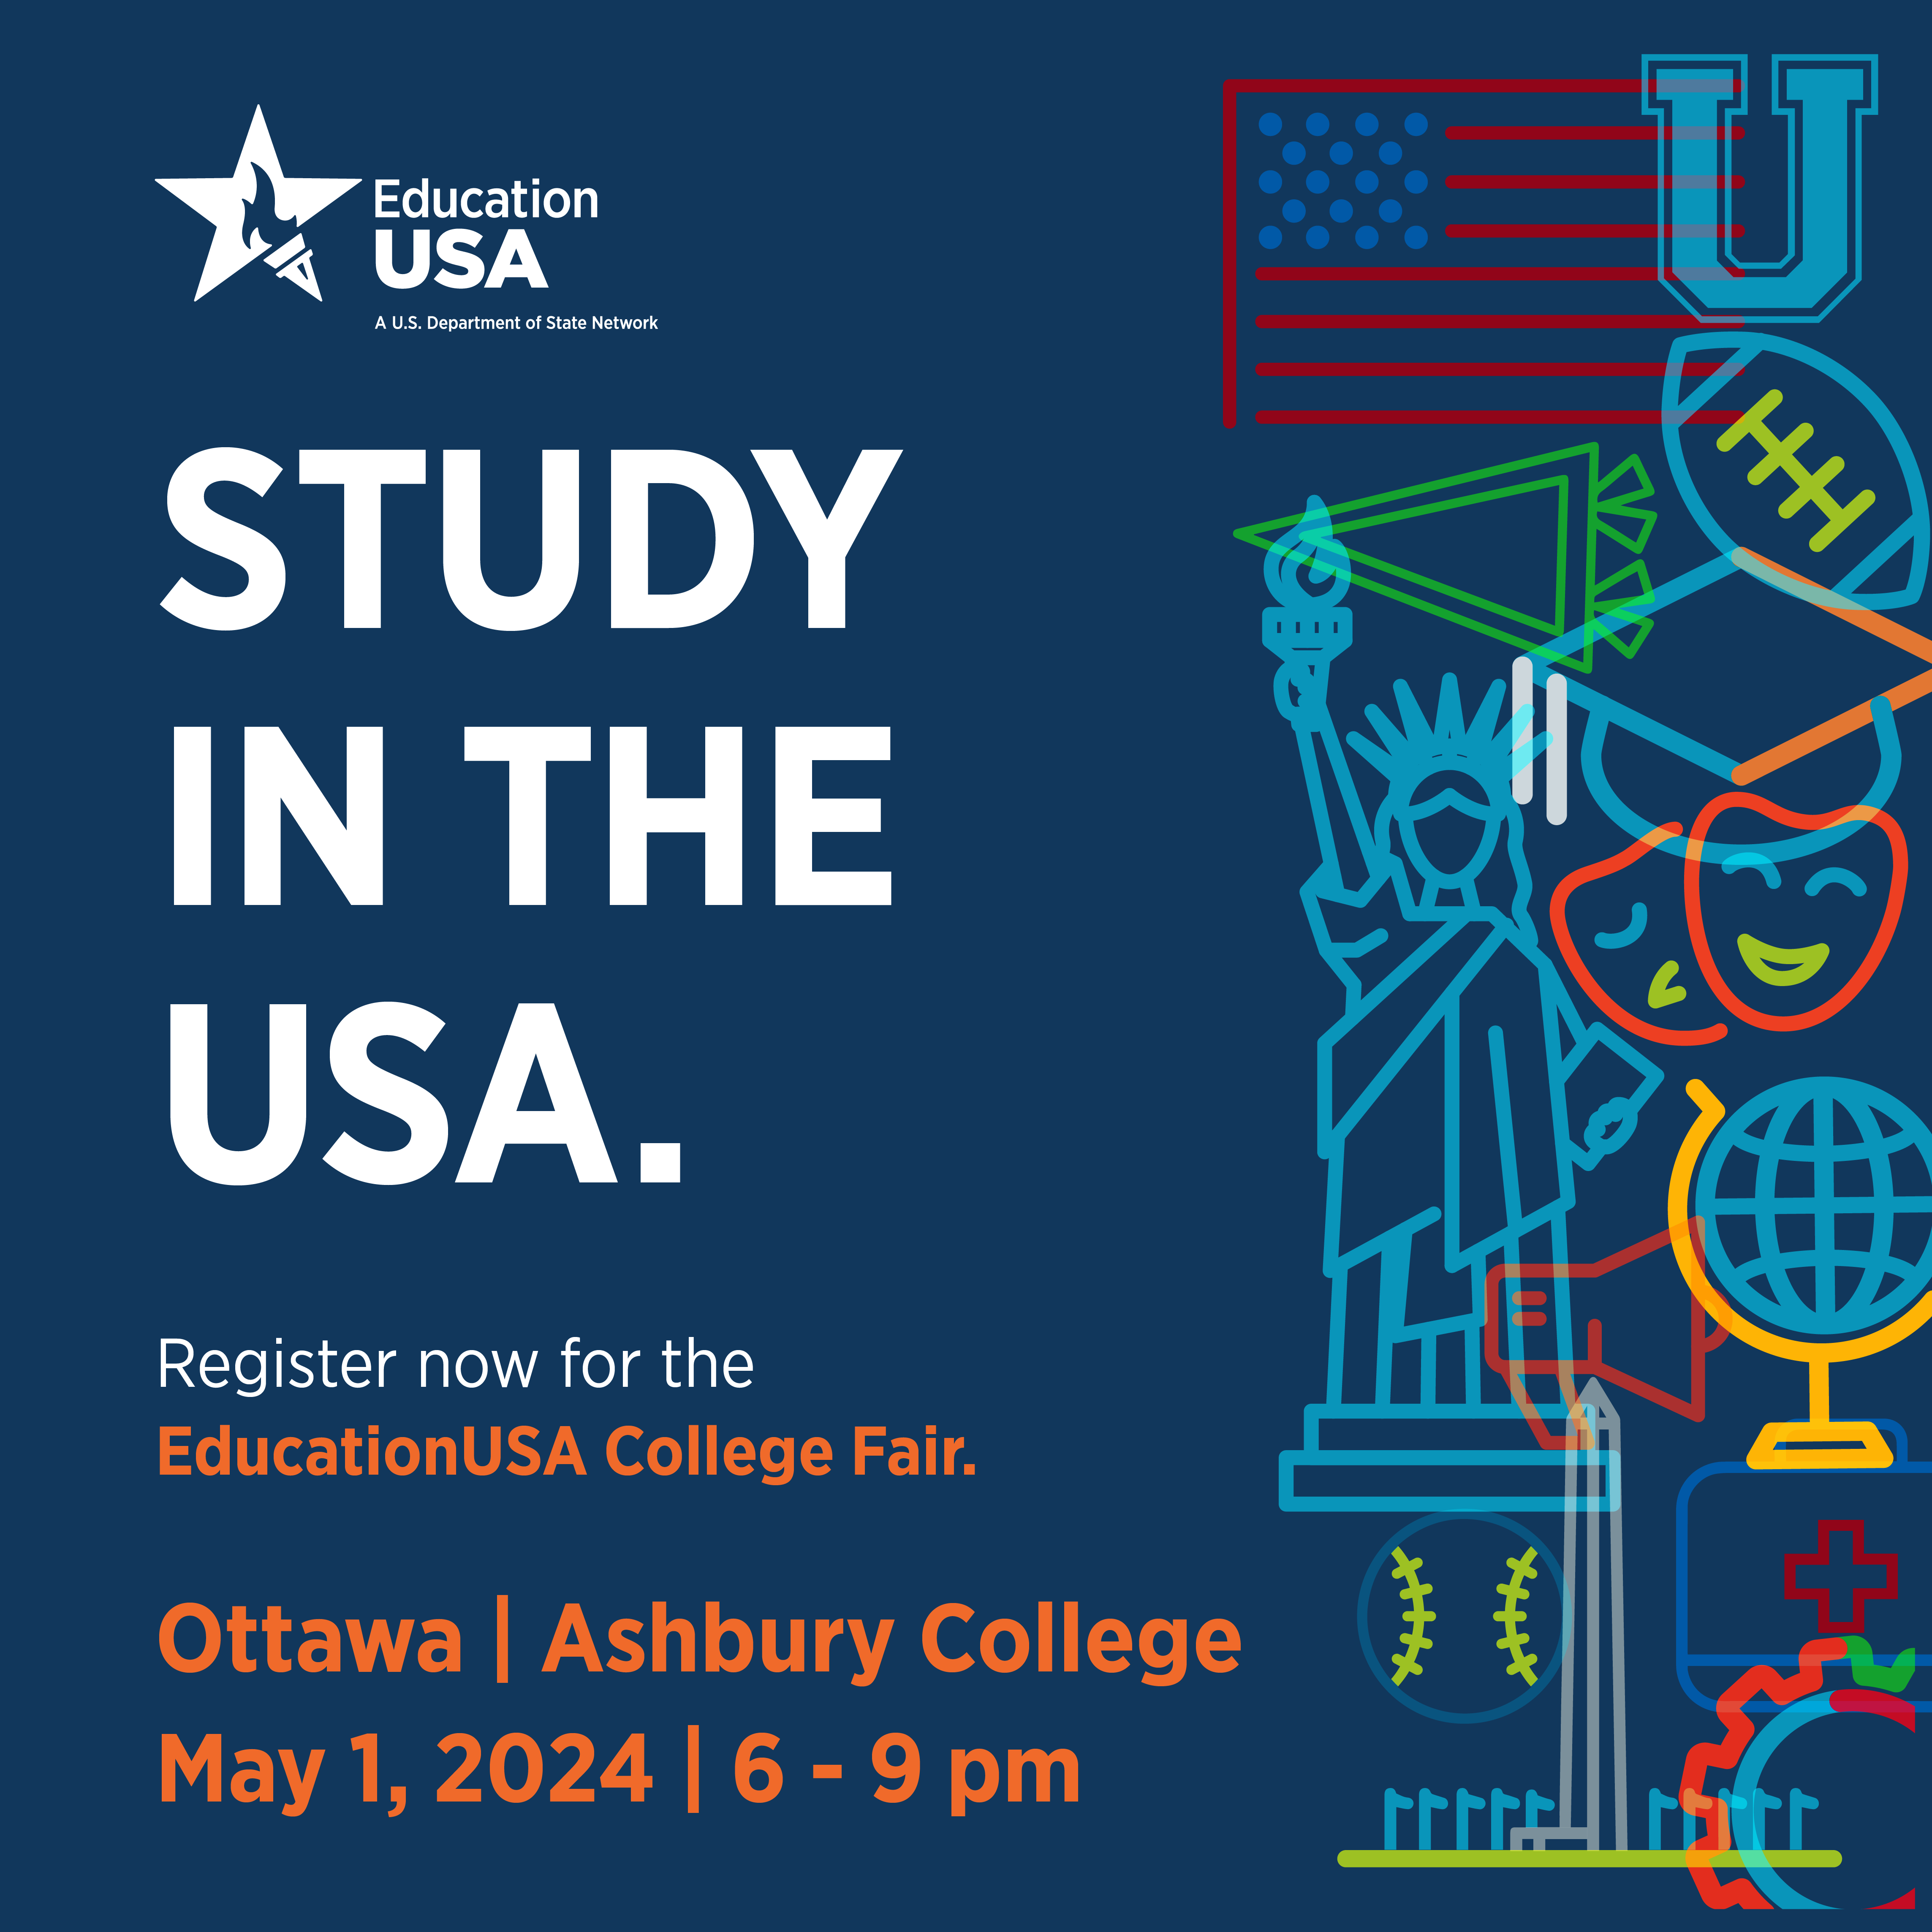 Neon icons depicting American and college items like the statue of liberty, a baseball, a globe, theatre masks, an american flag, a football, and a graduation cap. Study in the USA. Register now for the EducationUSA College Fair. Ottawa. Ashbury College. May 1, 2024. 6 to 9 pm.